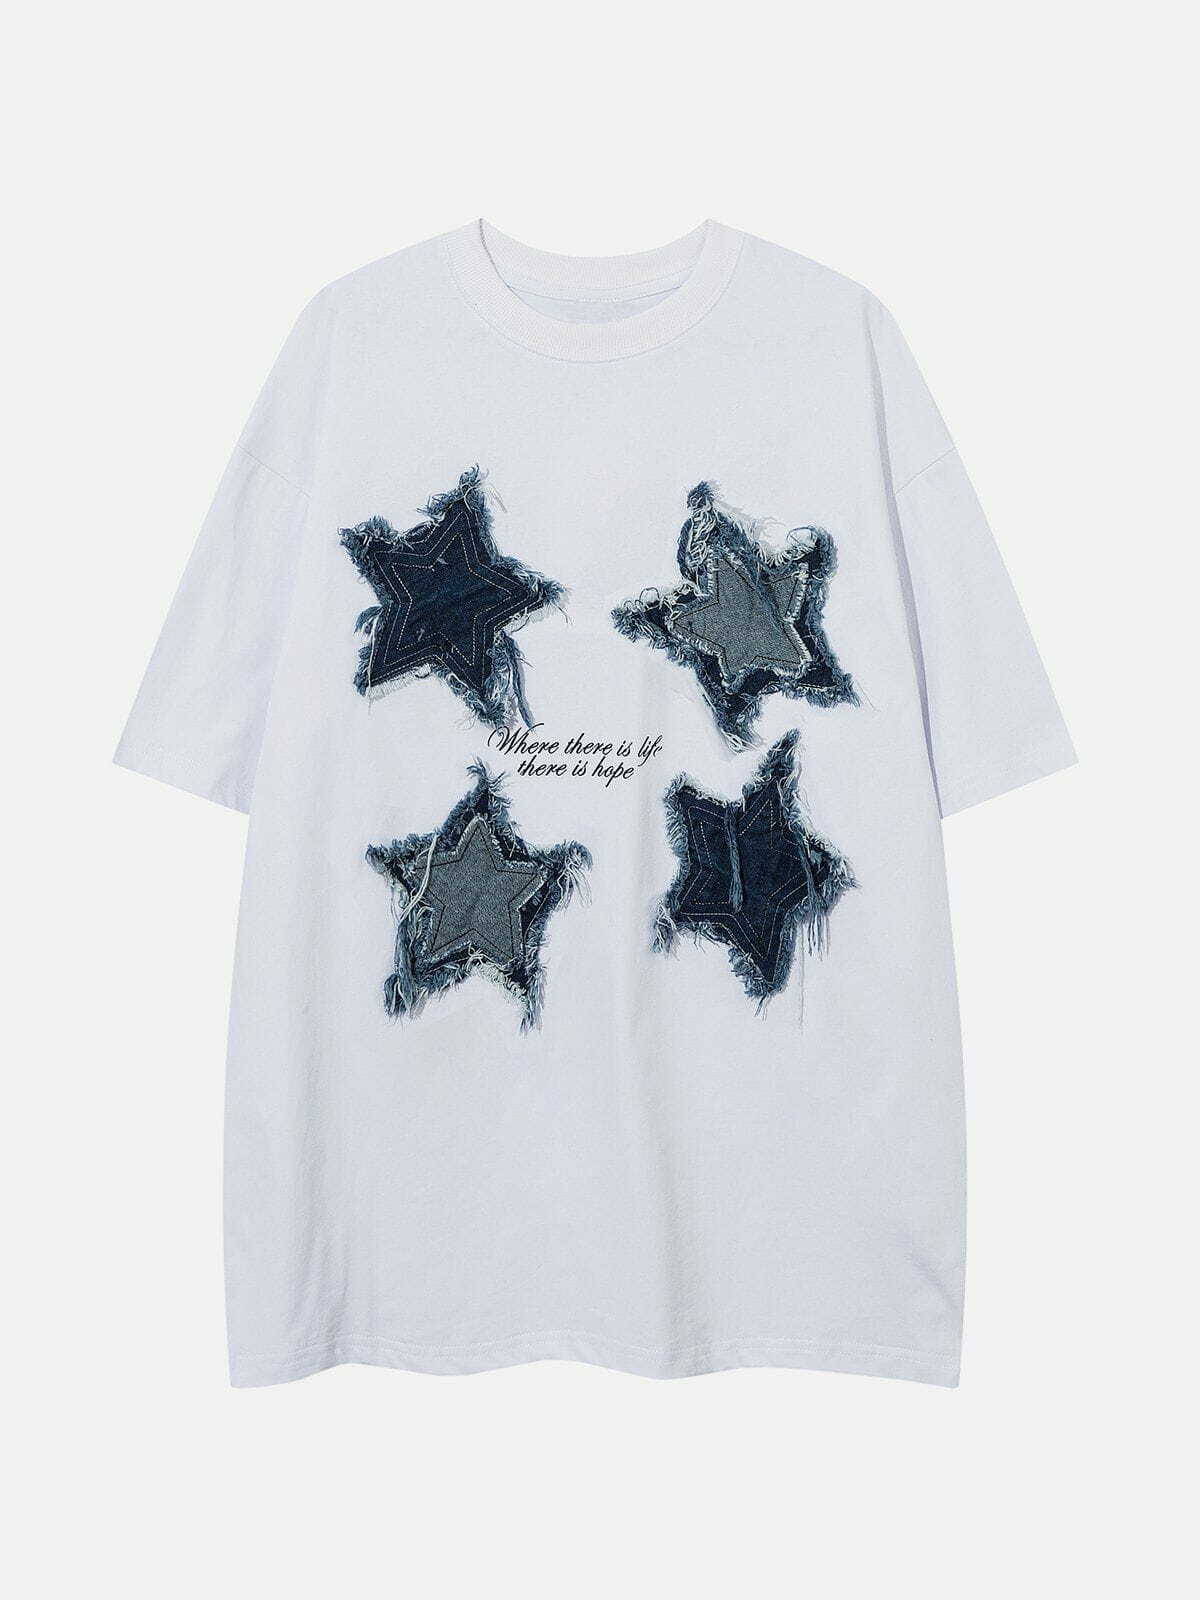 embroidered denim star tee   chic & youthful fashion staple 8158